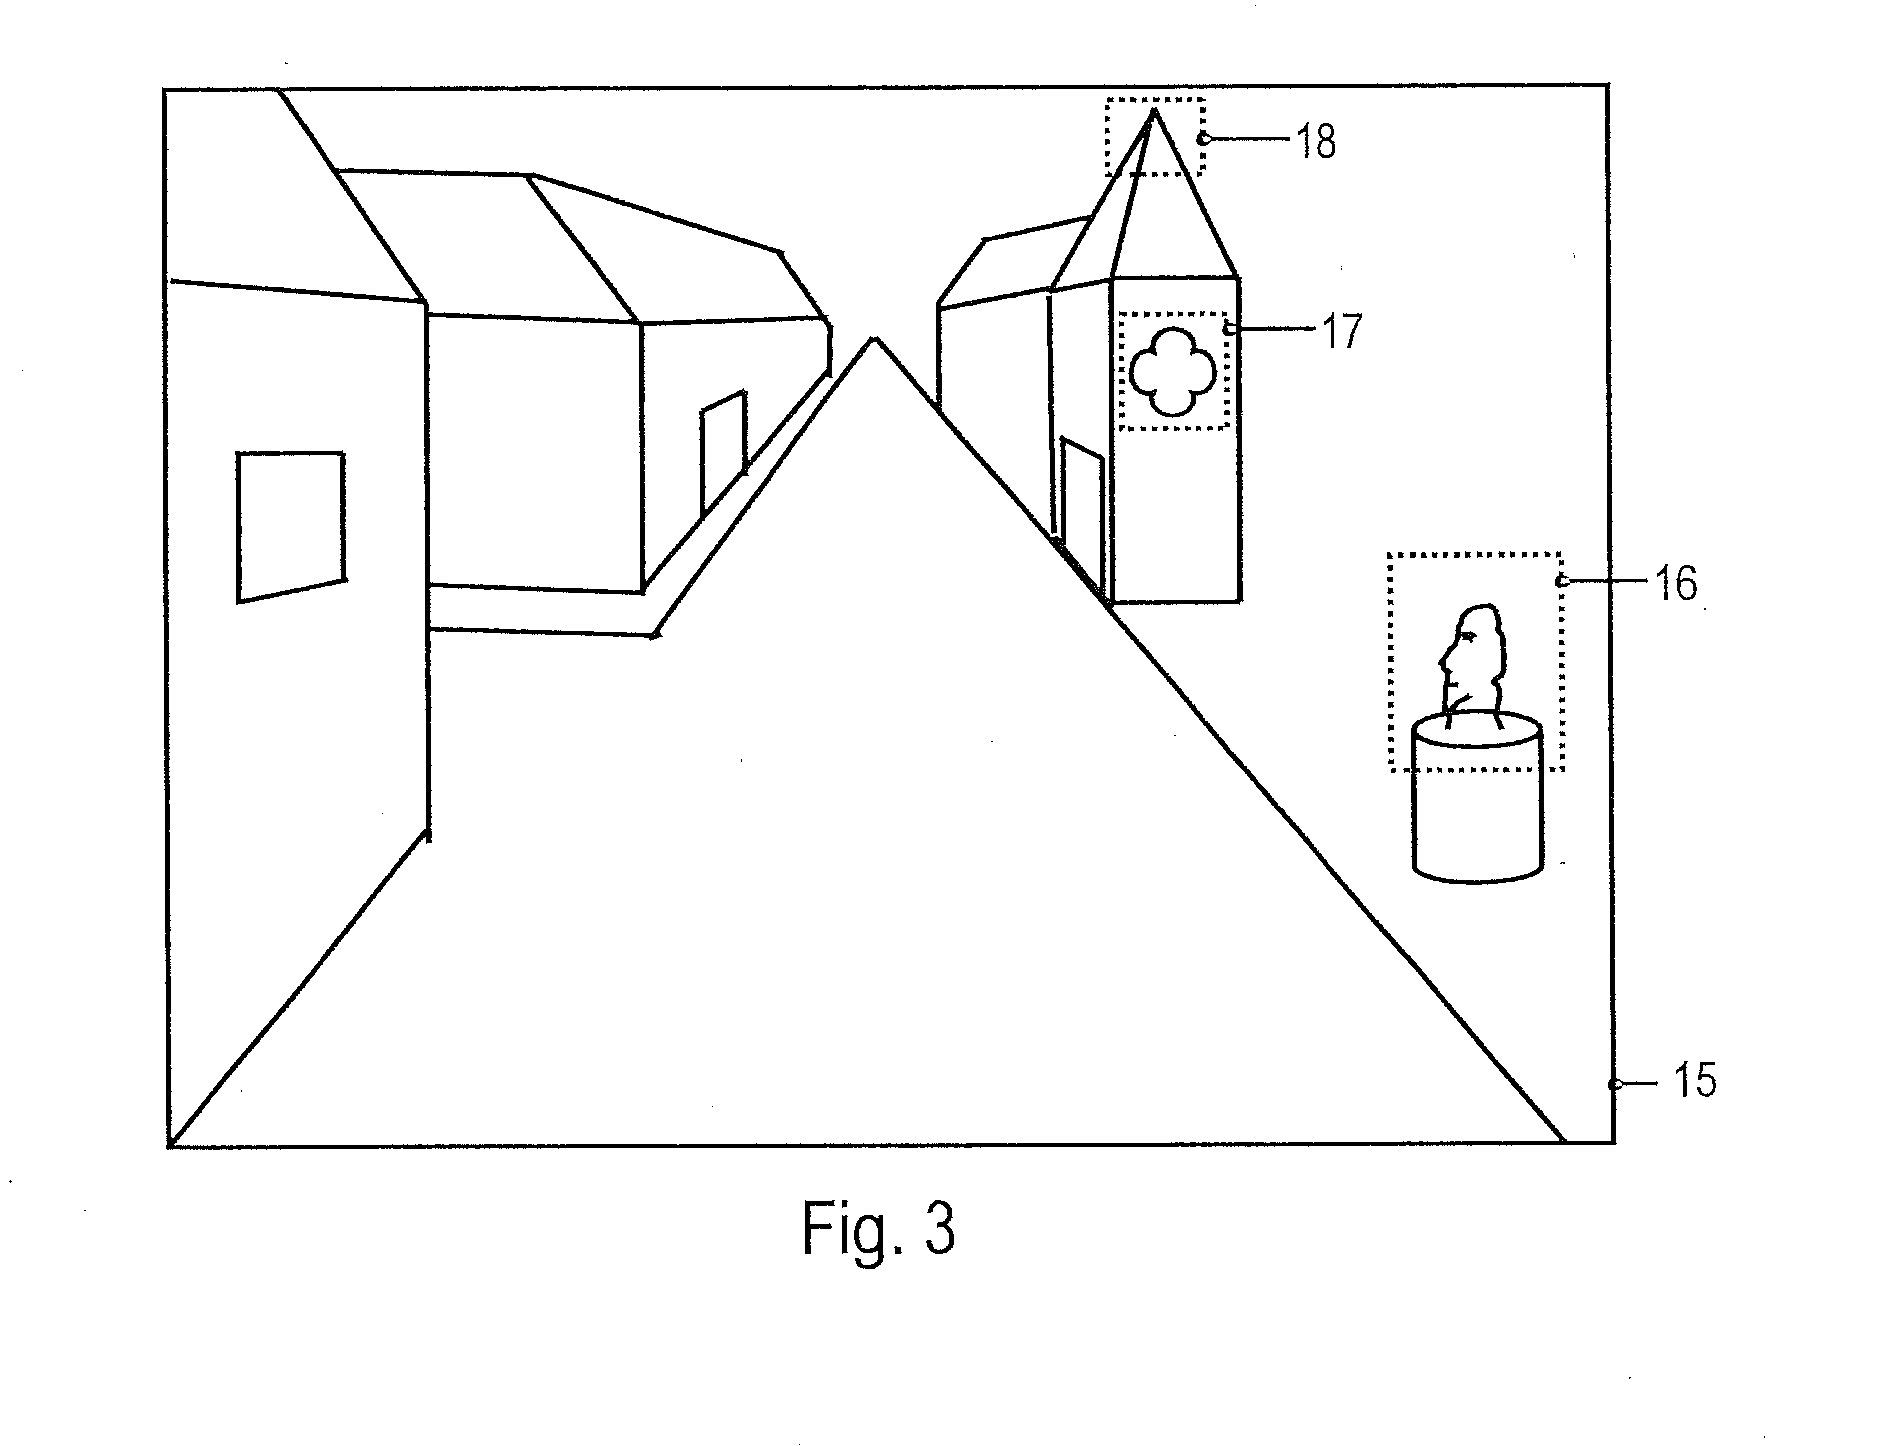 Vision system and method of analyzing an image